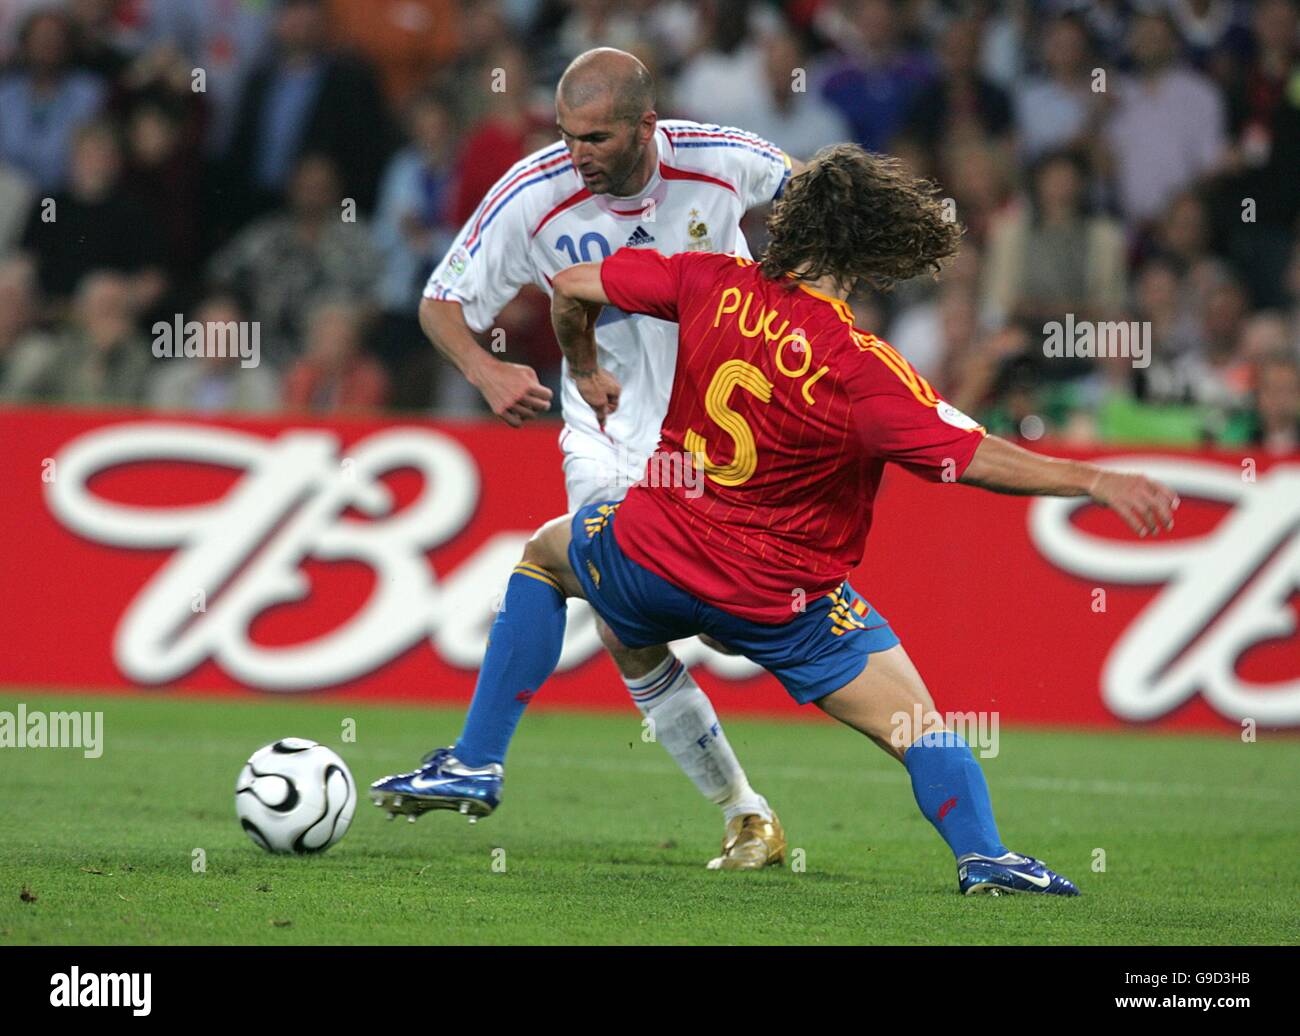 Soccer - 2006 FIFA World Cup Germany - Second Round - Spain v France - AWD Arena. France's Zinedine Zidane skips past Spain's Carles Puyol before scoring the winning goal Stock Photo